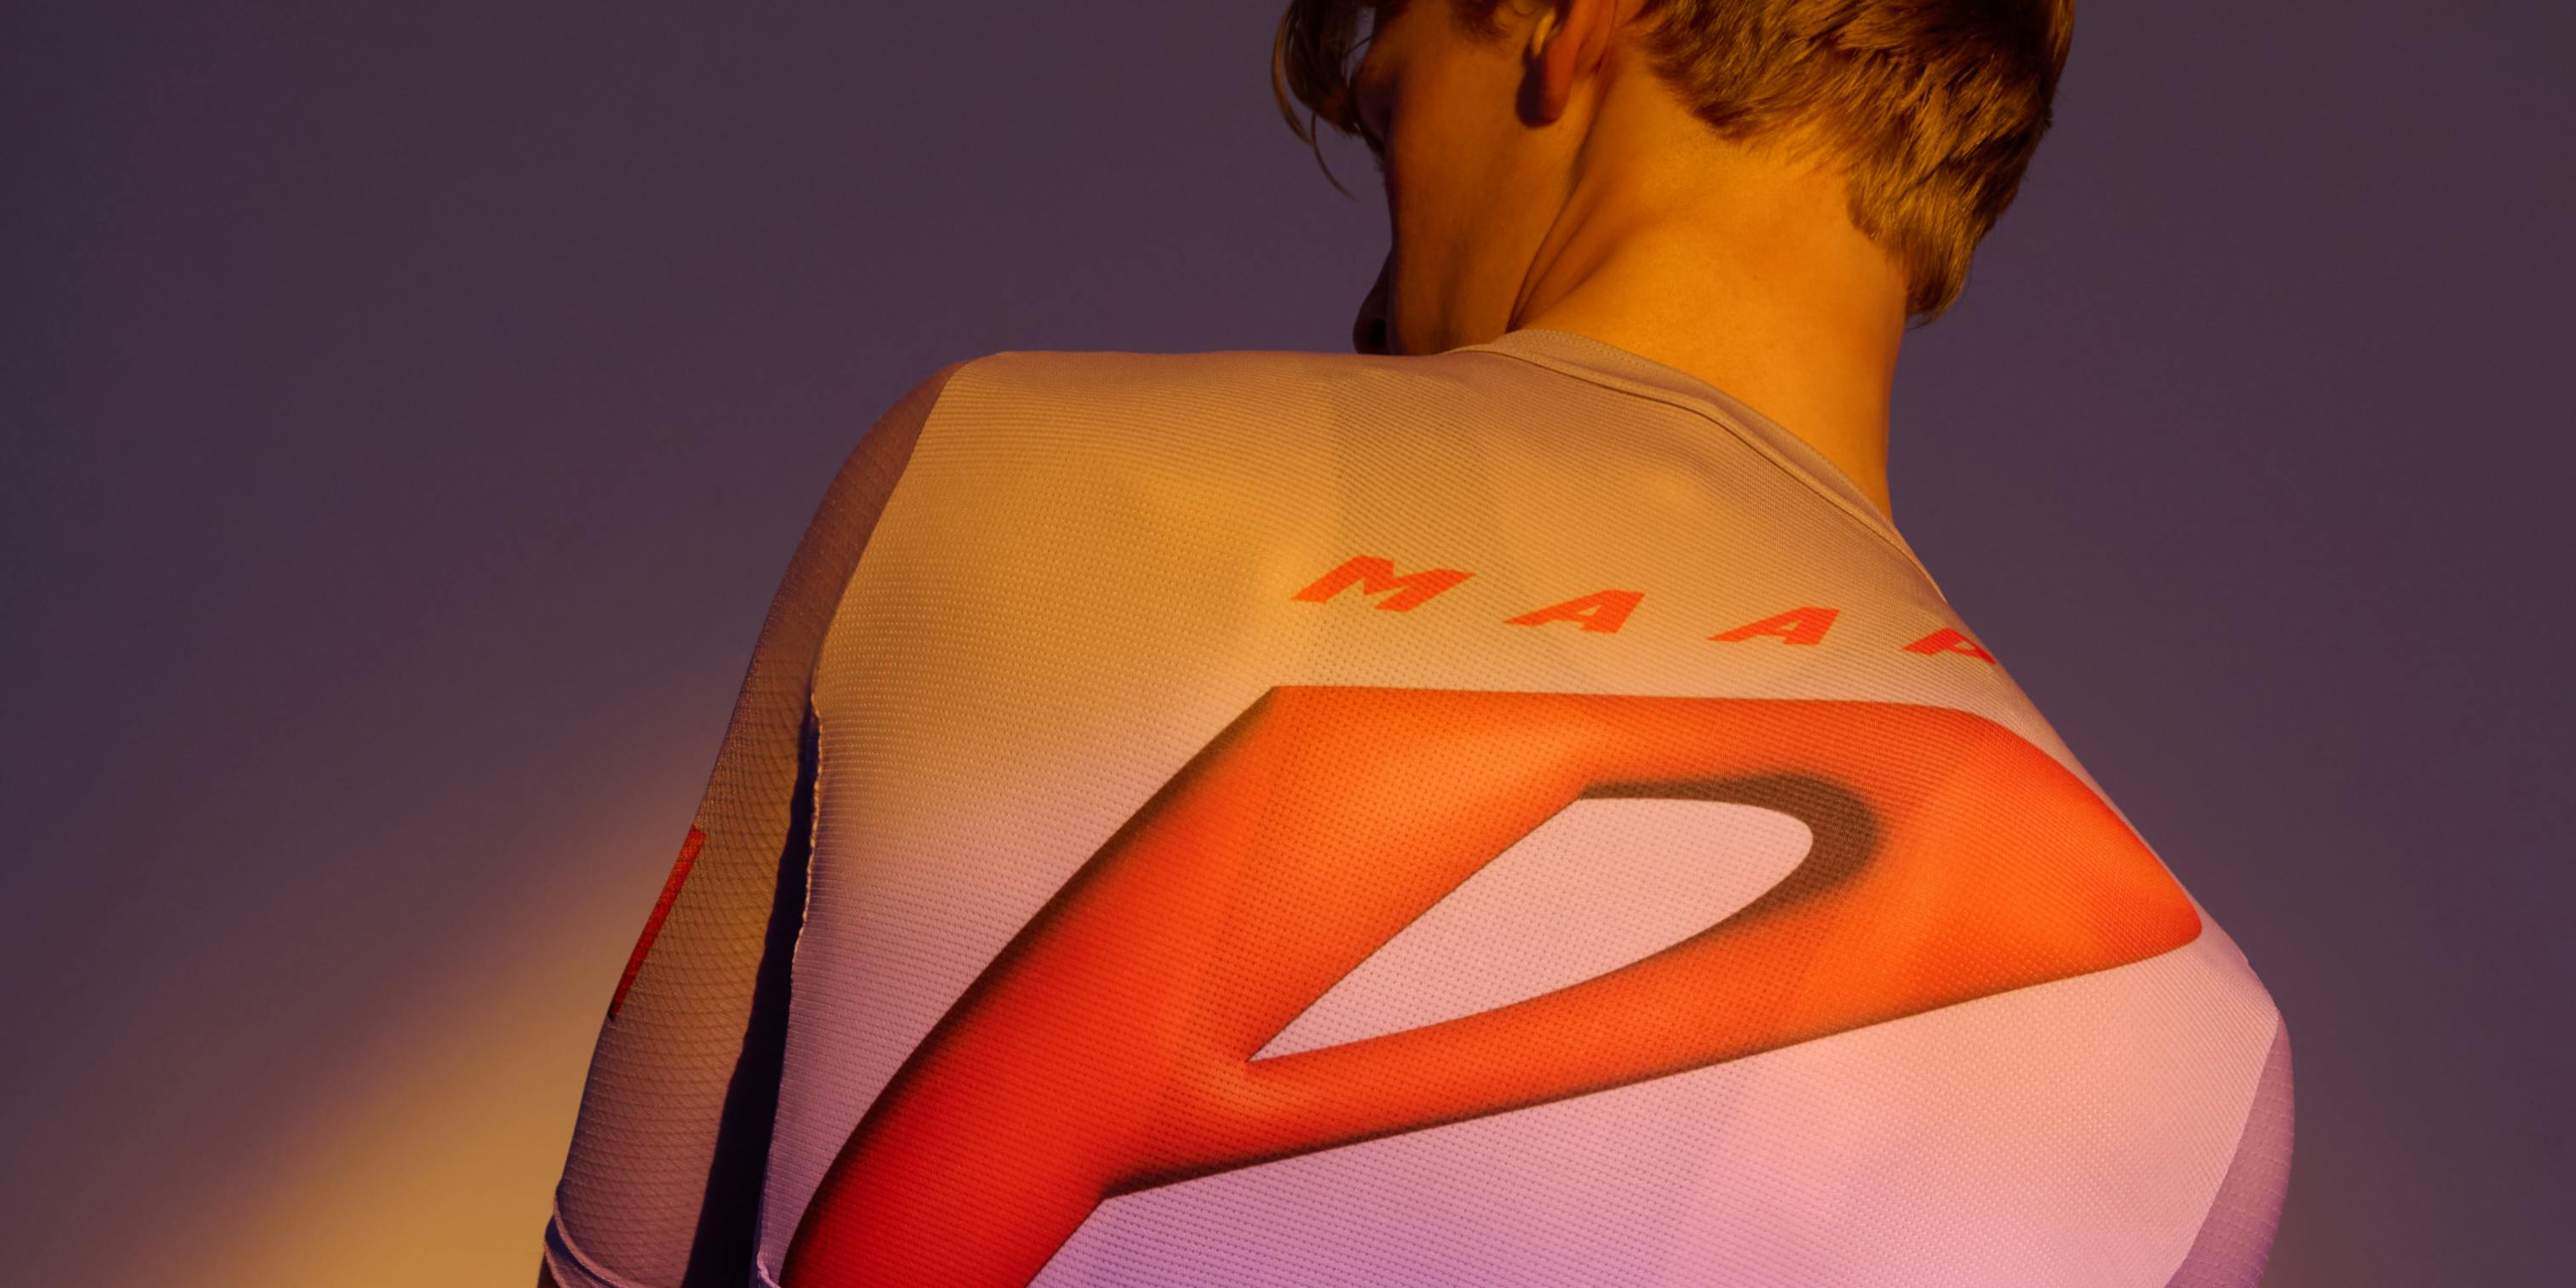 New Pro Air and thermal jerseys channelling the raw power of perpetual  progression